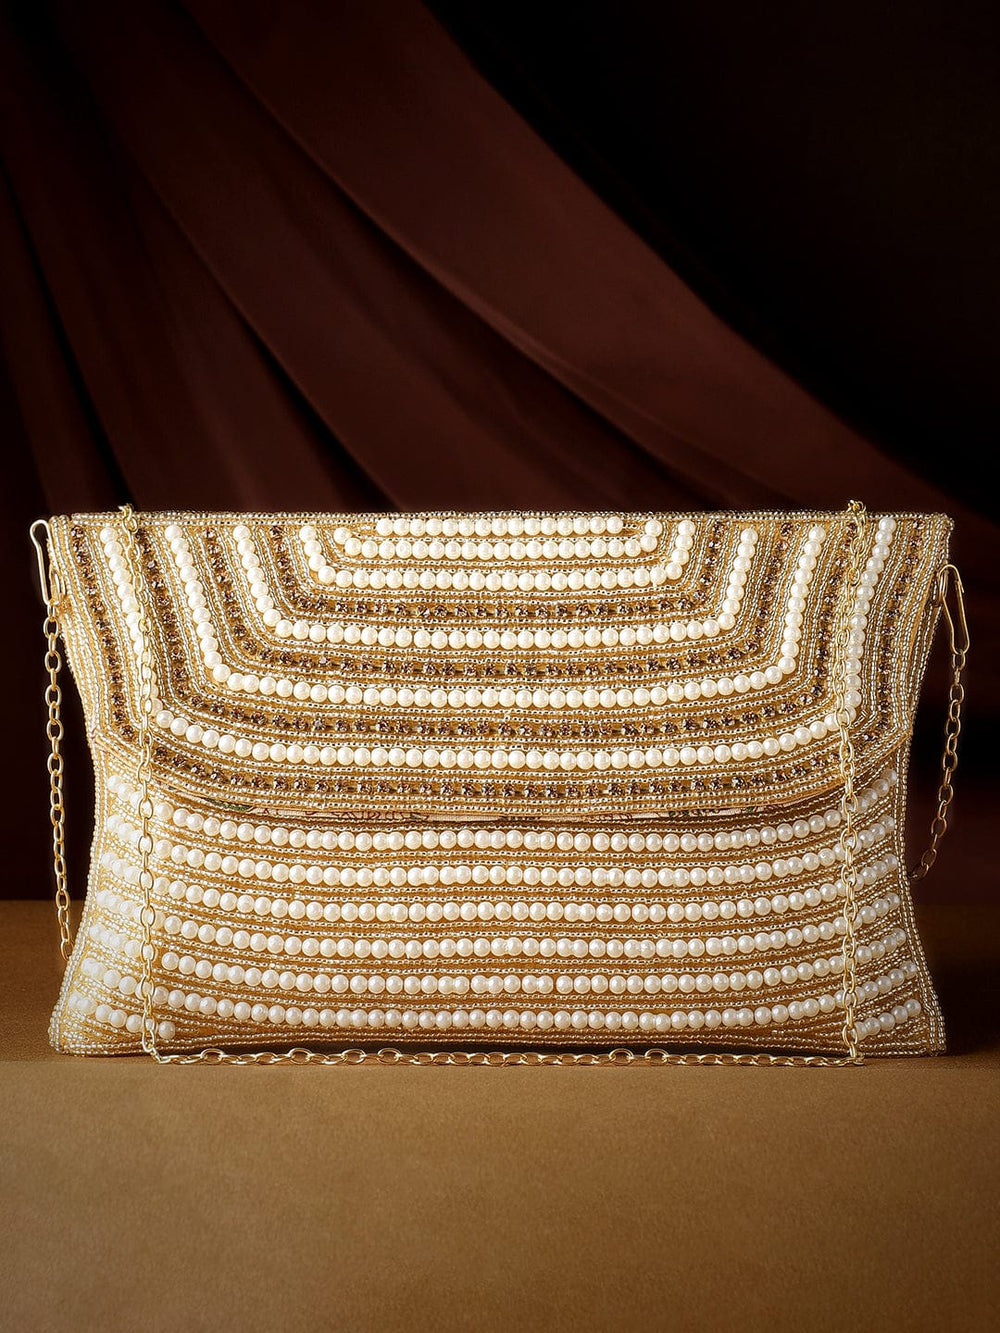 Rubans Clutch Embellished with Pearls and Stones Handbag, Wallet Accessories & Clutches